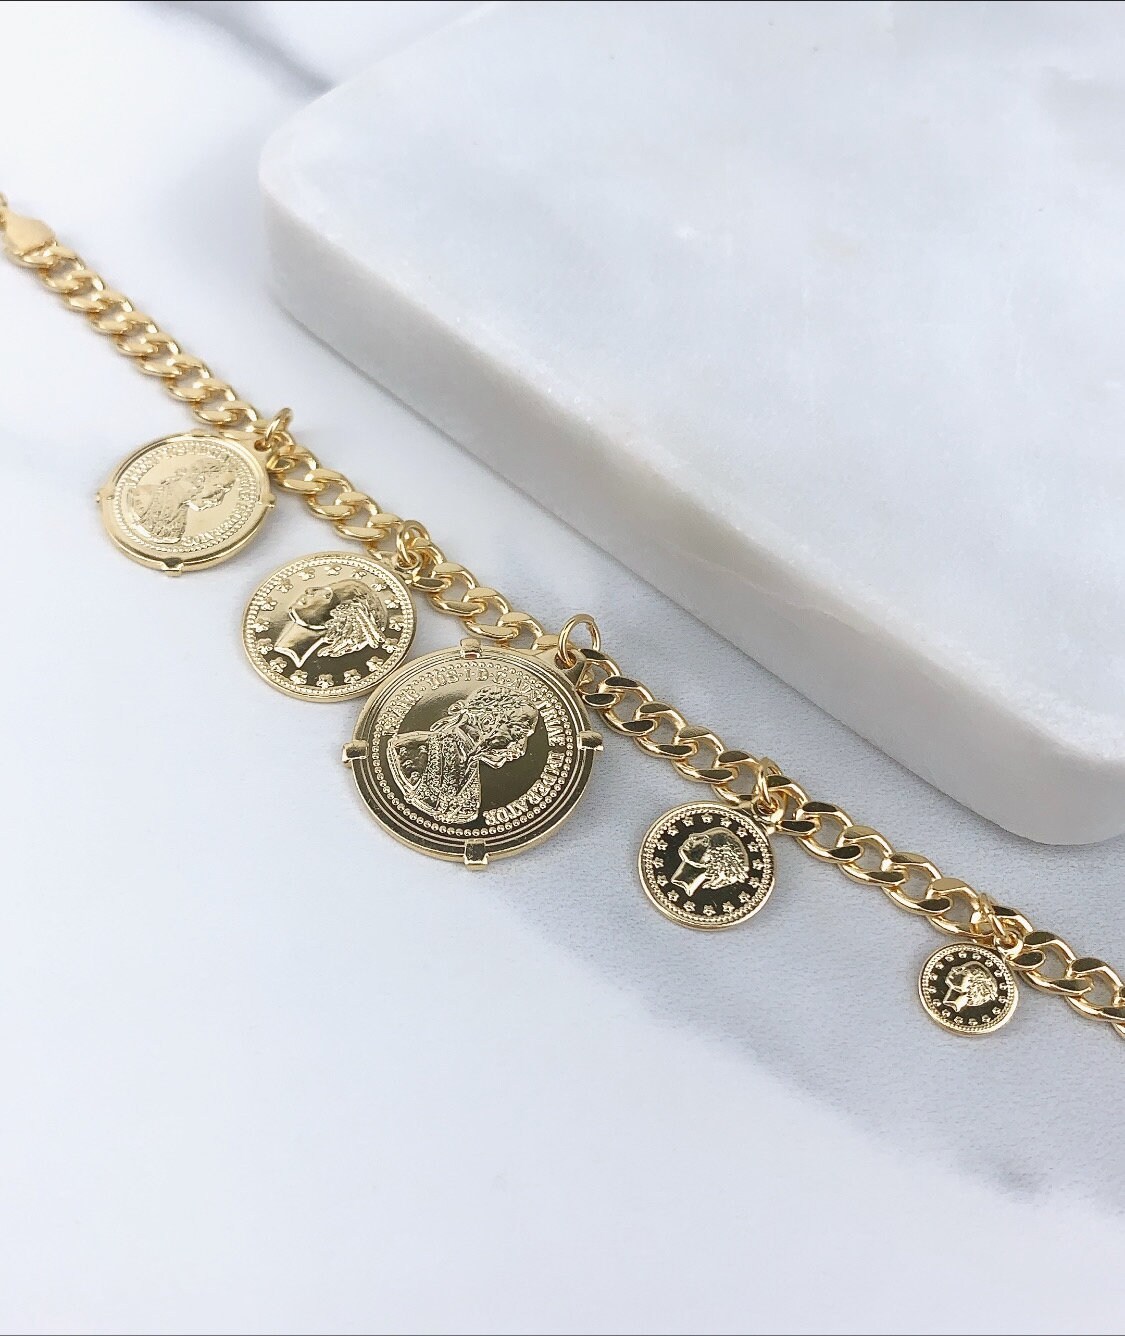 18k Gold Filled American Coins Different Sizes Coins Charm - Etsy